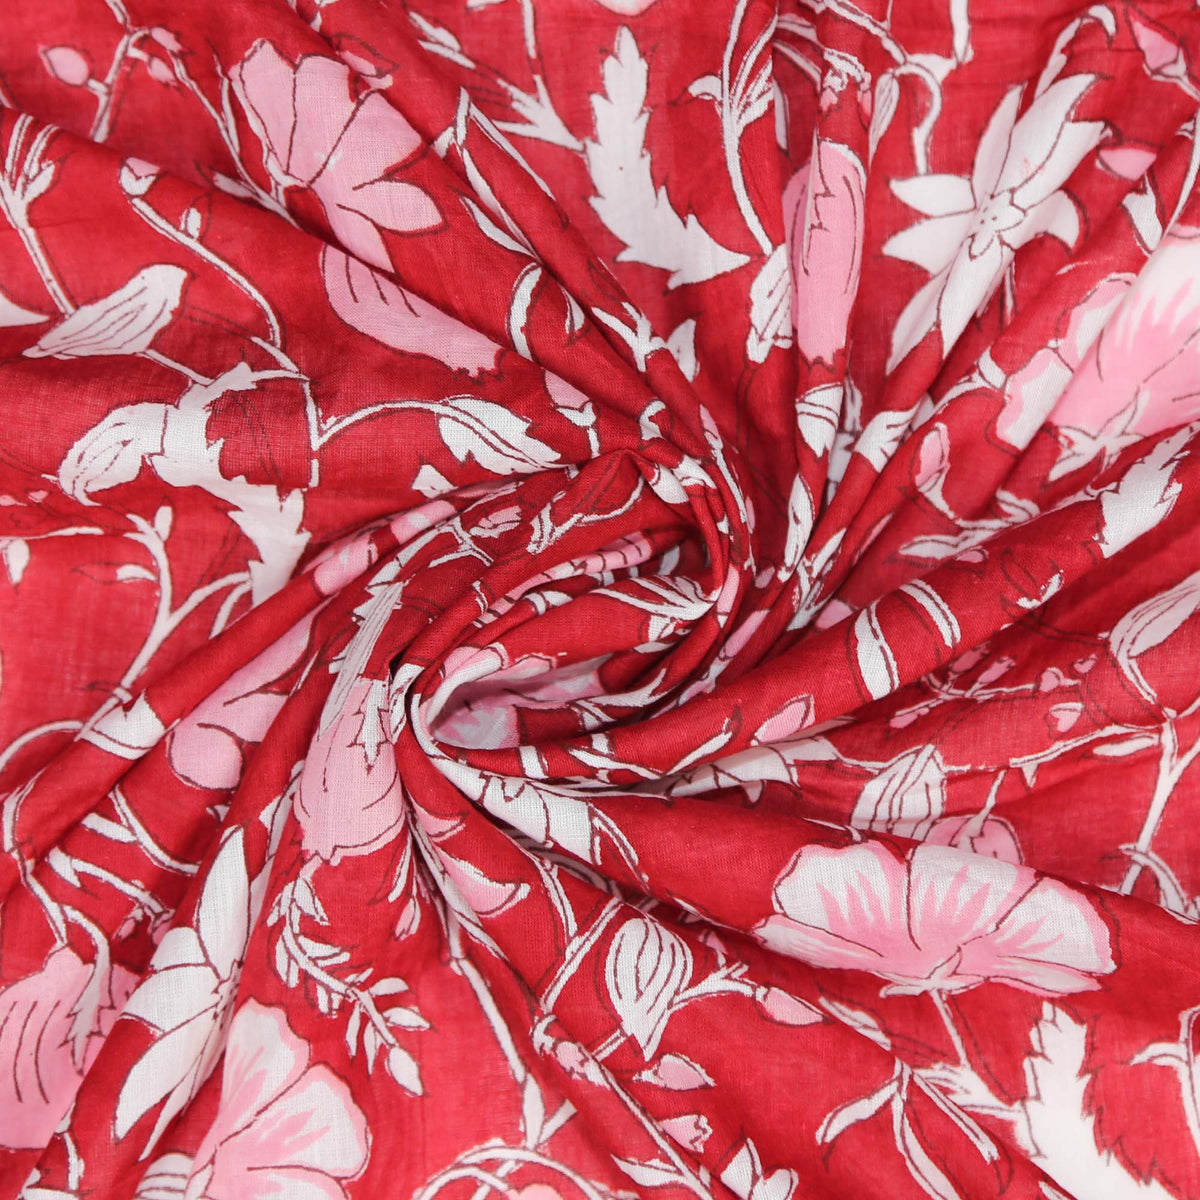 Indian Hand Block 100% Cotton Voile Pink Flemingo Flowers On Red Women Dress Fabric Design 455